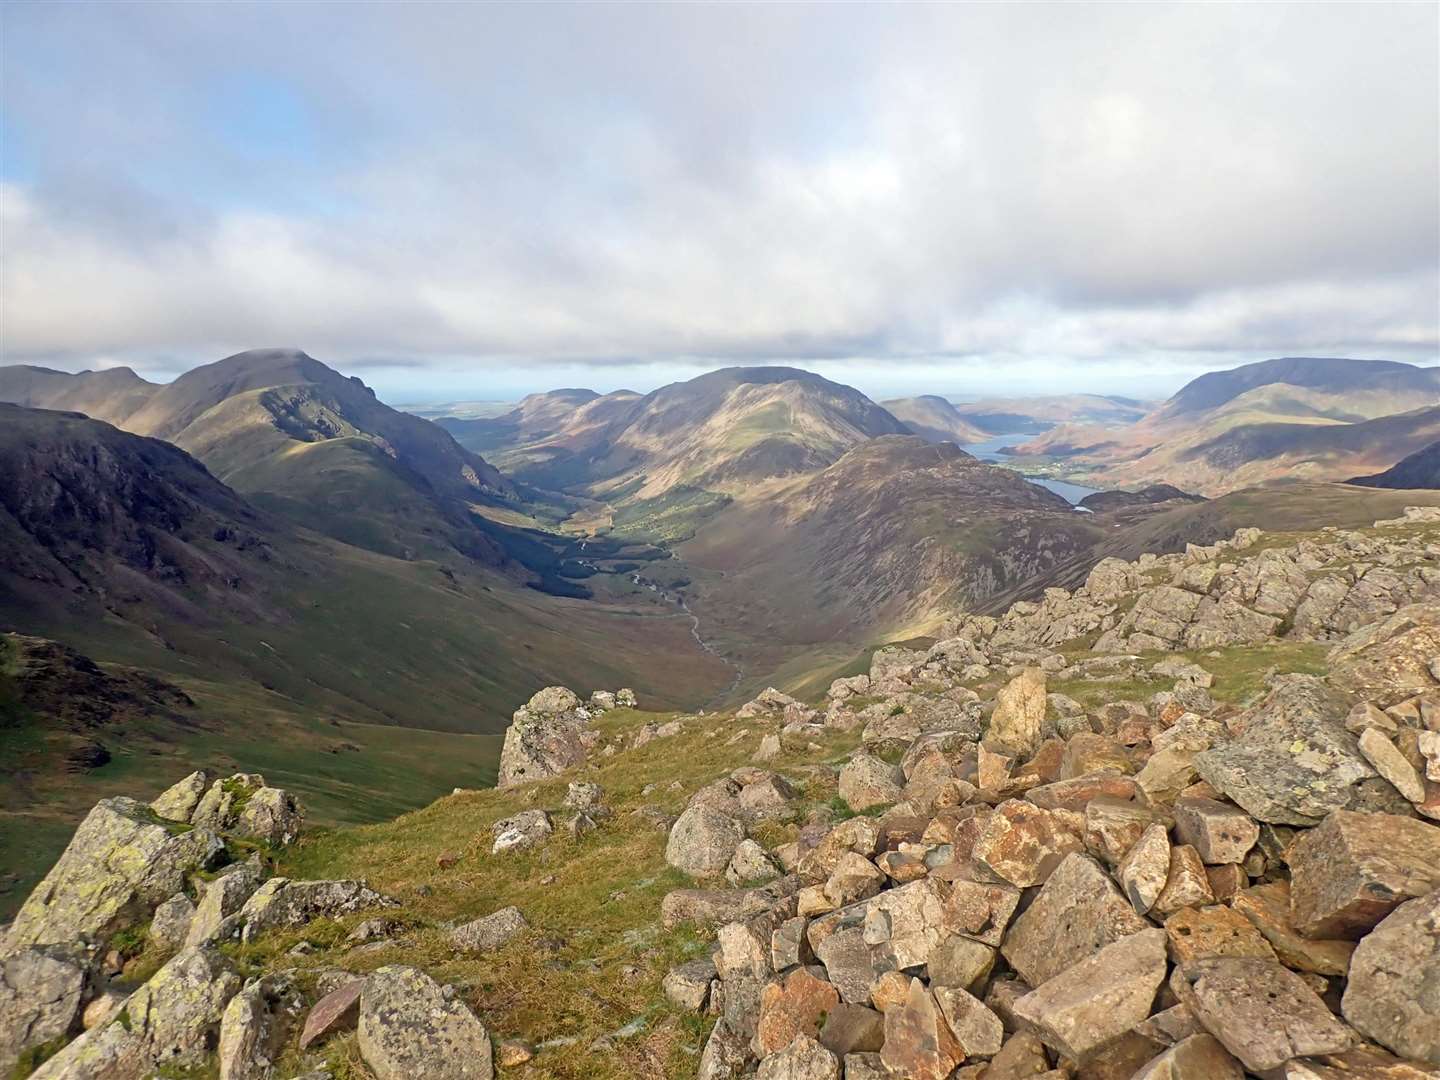 A view down towards the Buttermere and Ennerdale valleys.